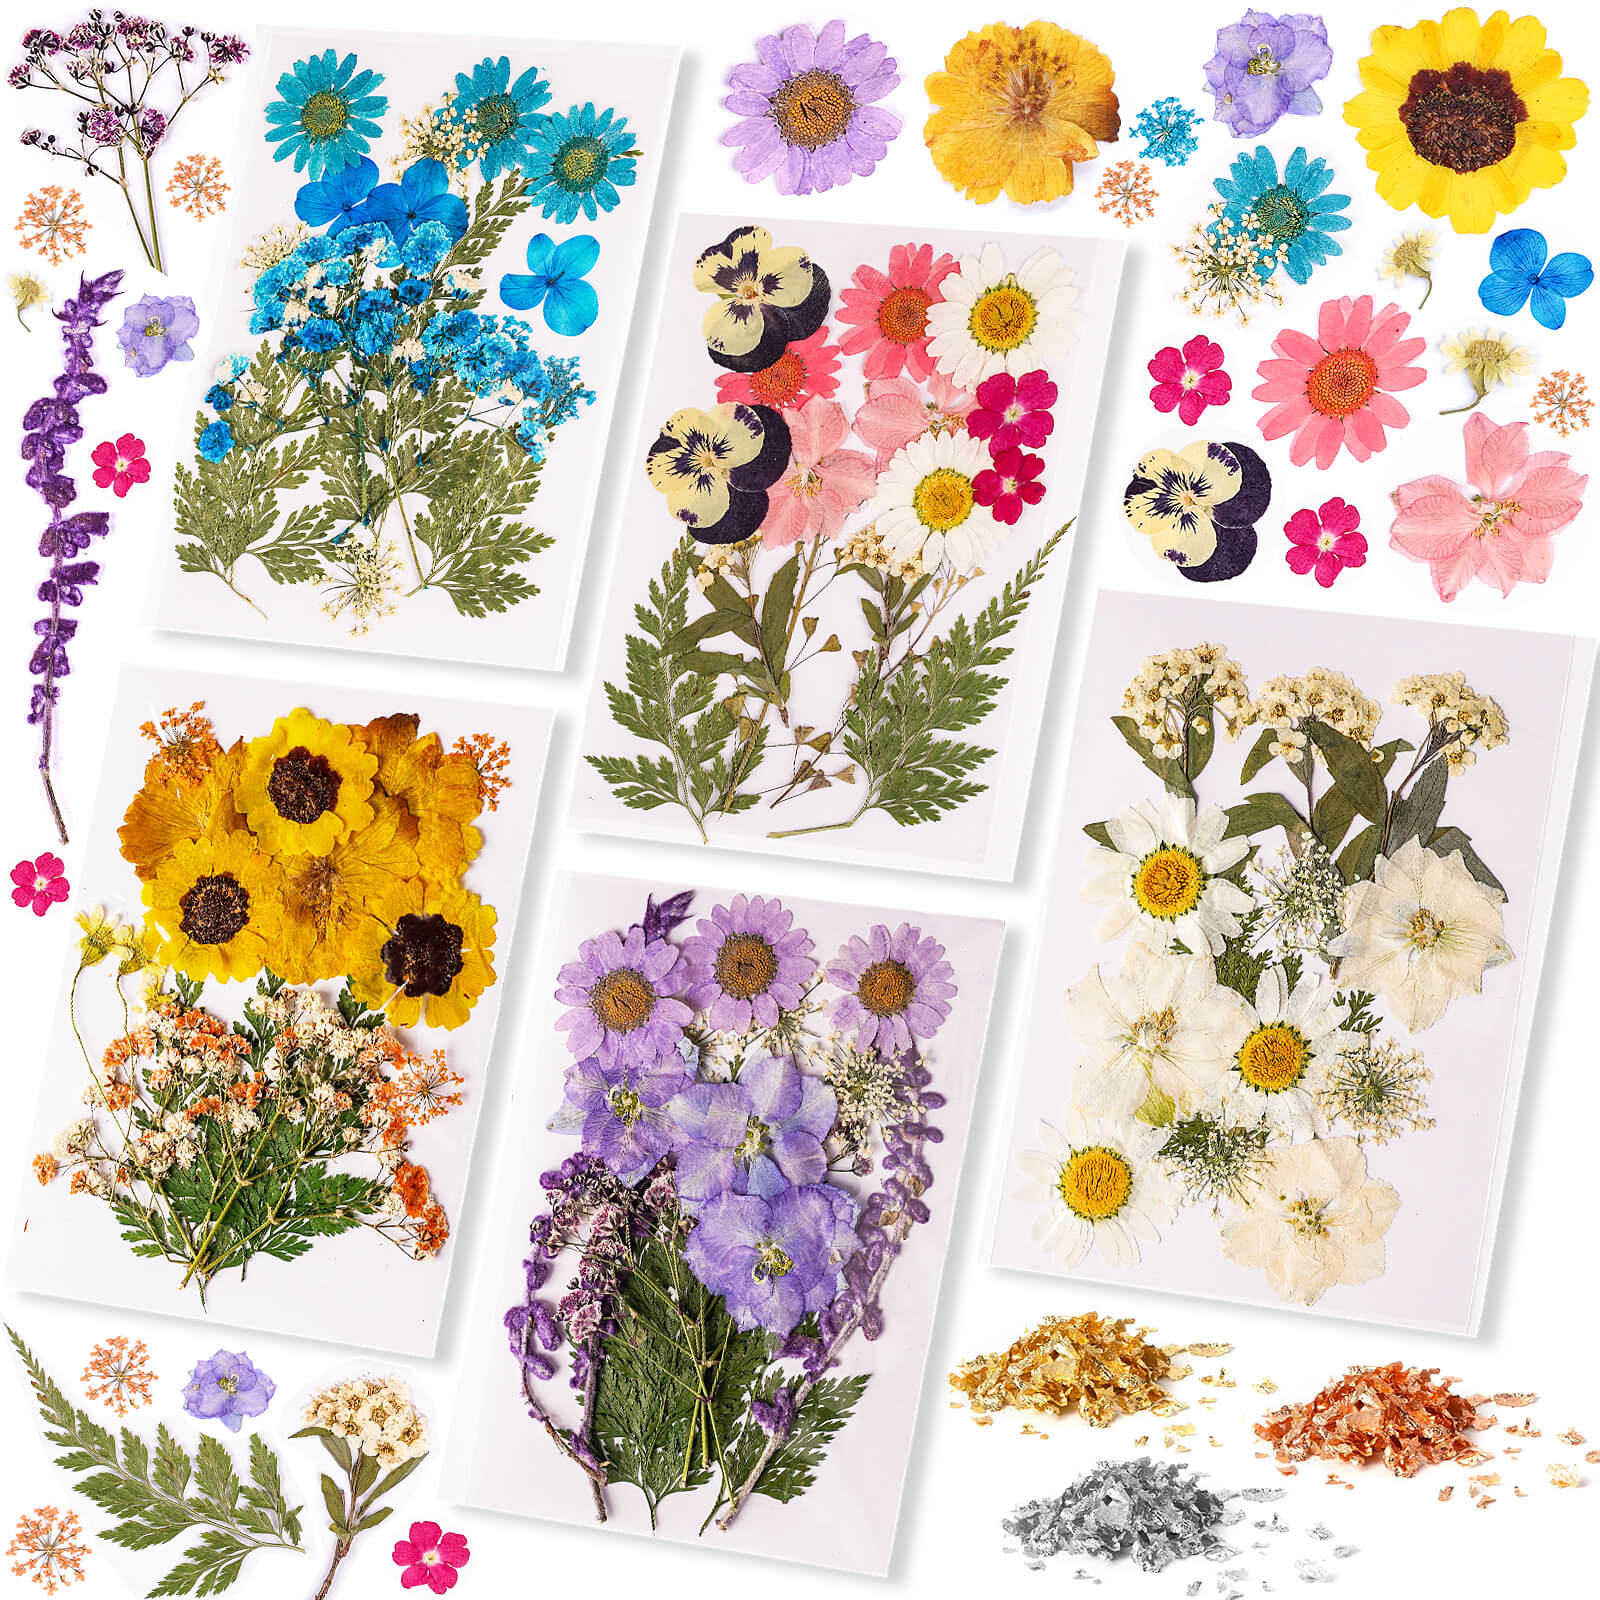 LET'S RESIN Dried Flowers for Resin,85Pcs Natural Dried Pressed